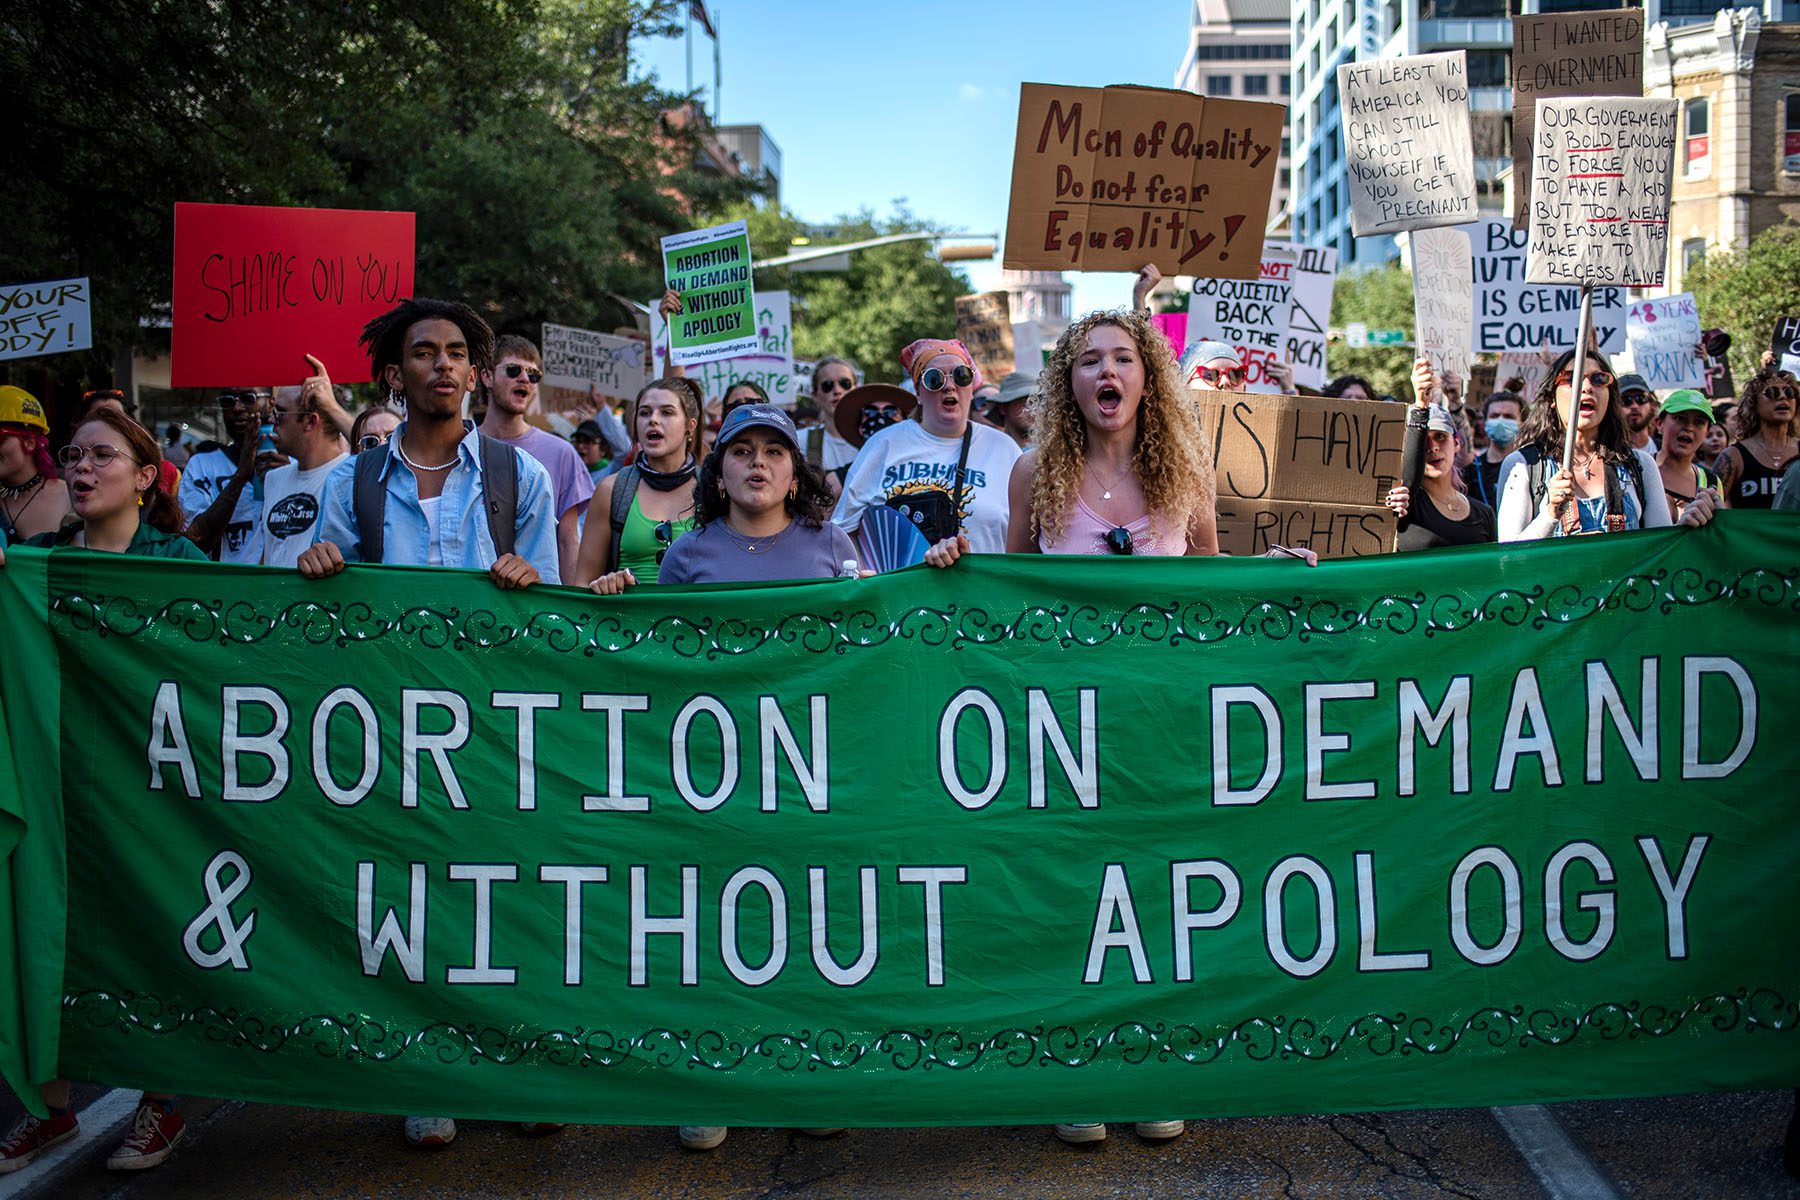 Protesters march while holding signs during an abortion-rights rally. A large banner reads 